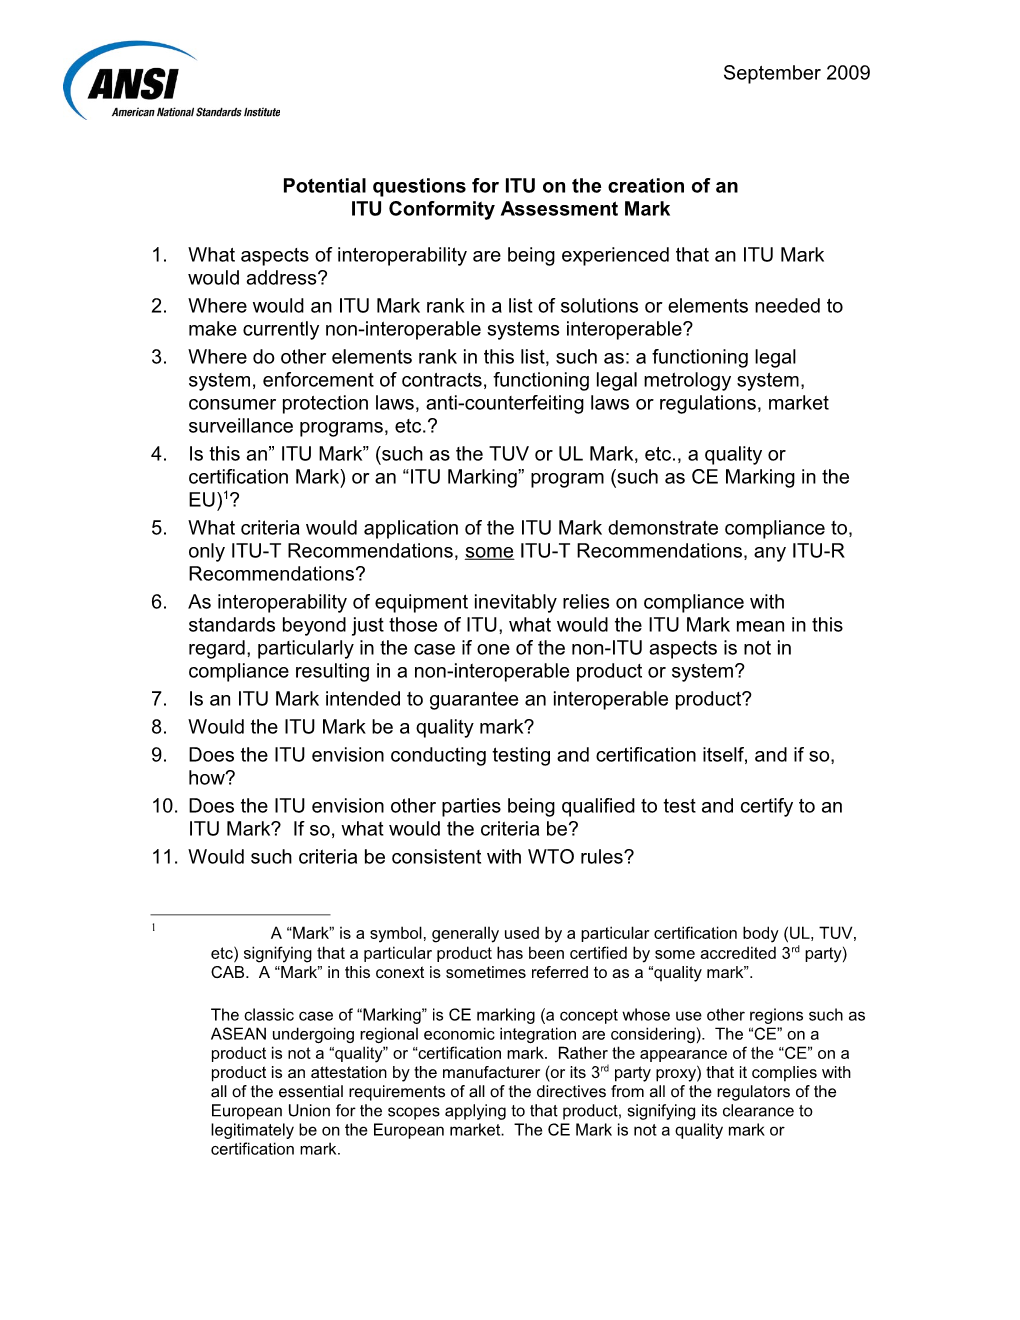 Potential Questions for ITU on the Creation of a New Conformity Assessment Mark